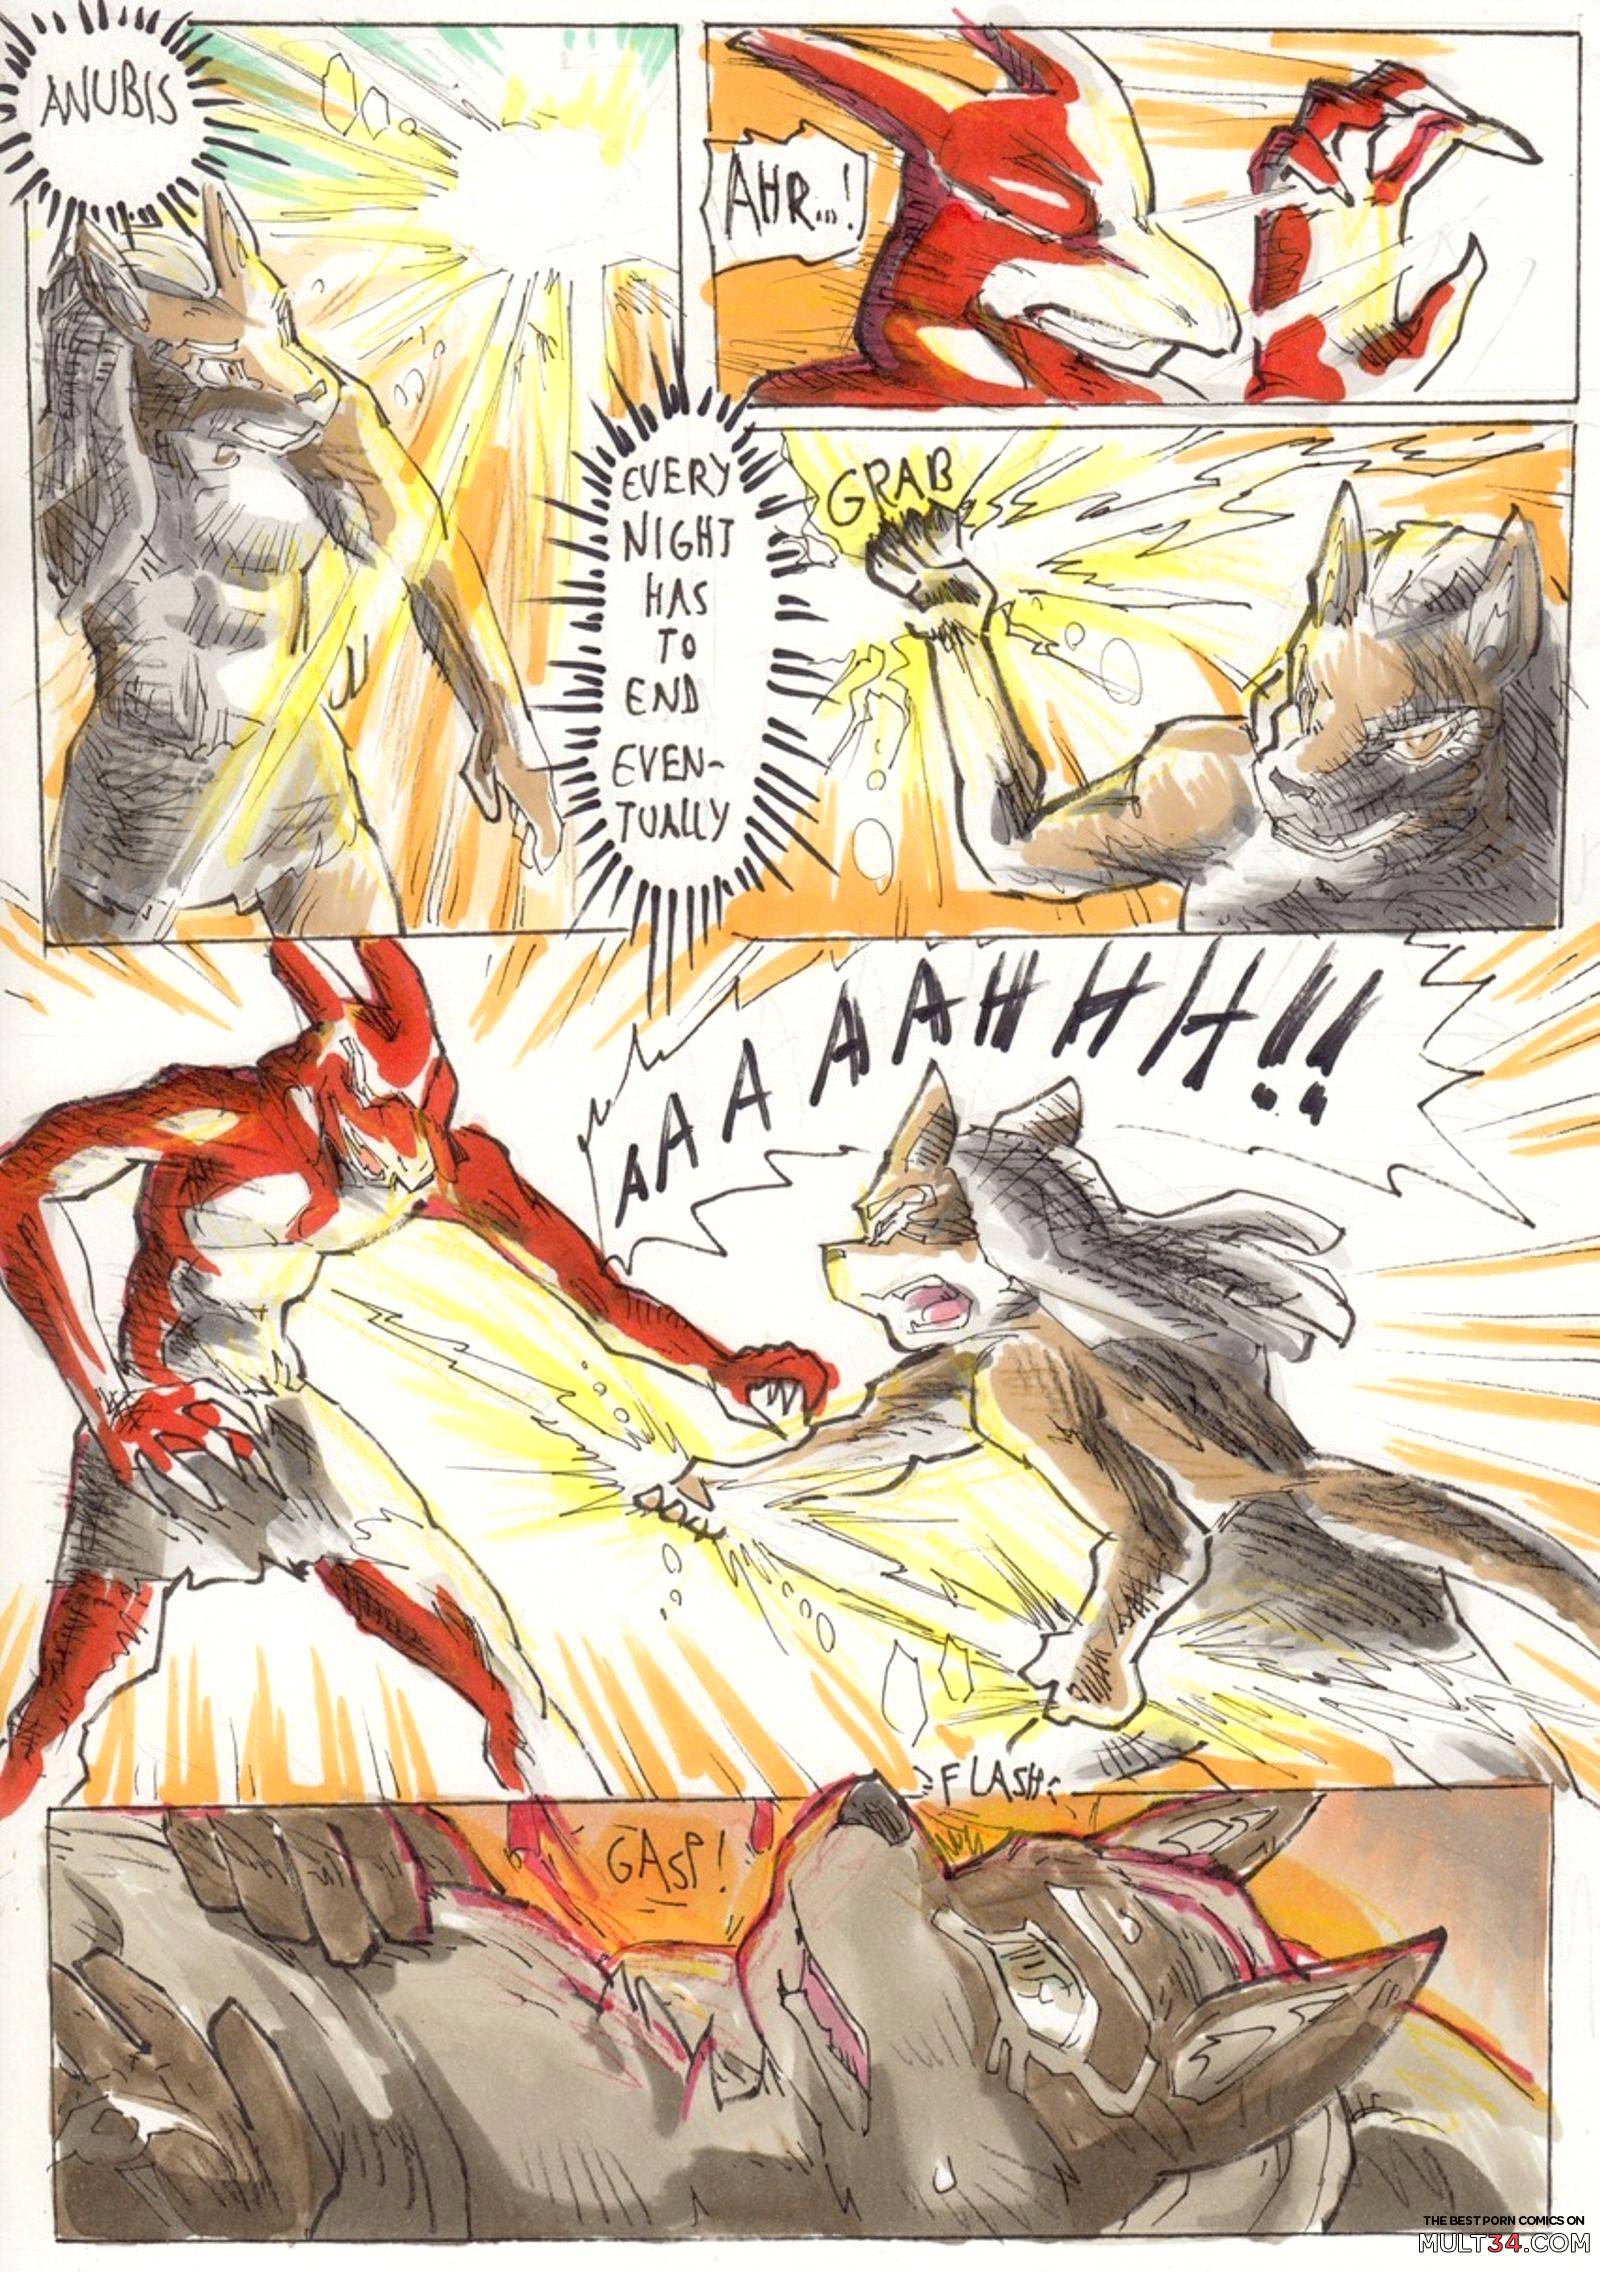 Anubis Stories 5 - The Battle for Anubipolis page 17